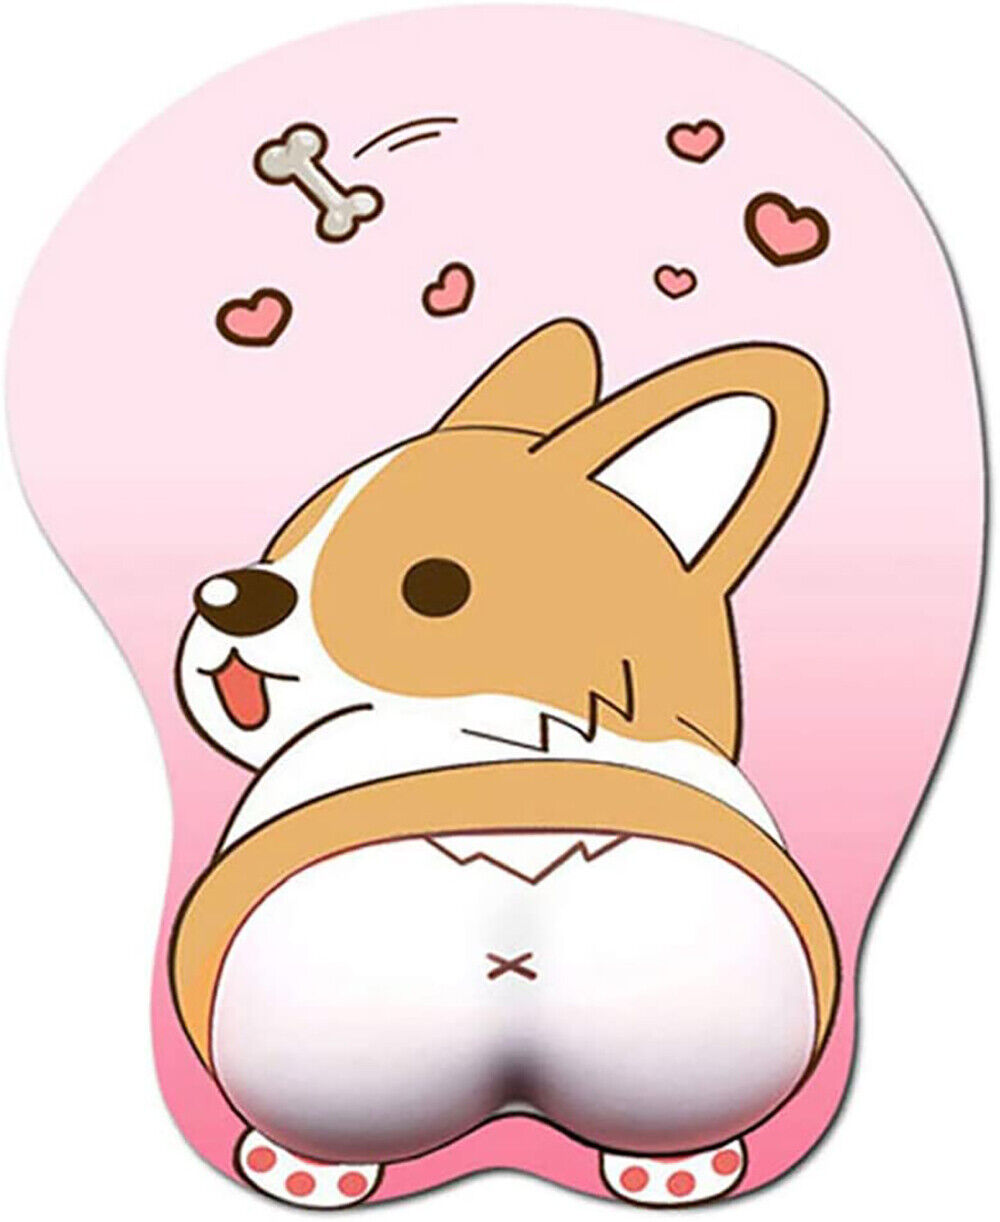 Anime Corgi dog butt 3D Mouse Pad with Wrist Rest Mousepad for Office PC Laptops